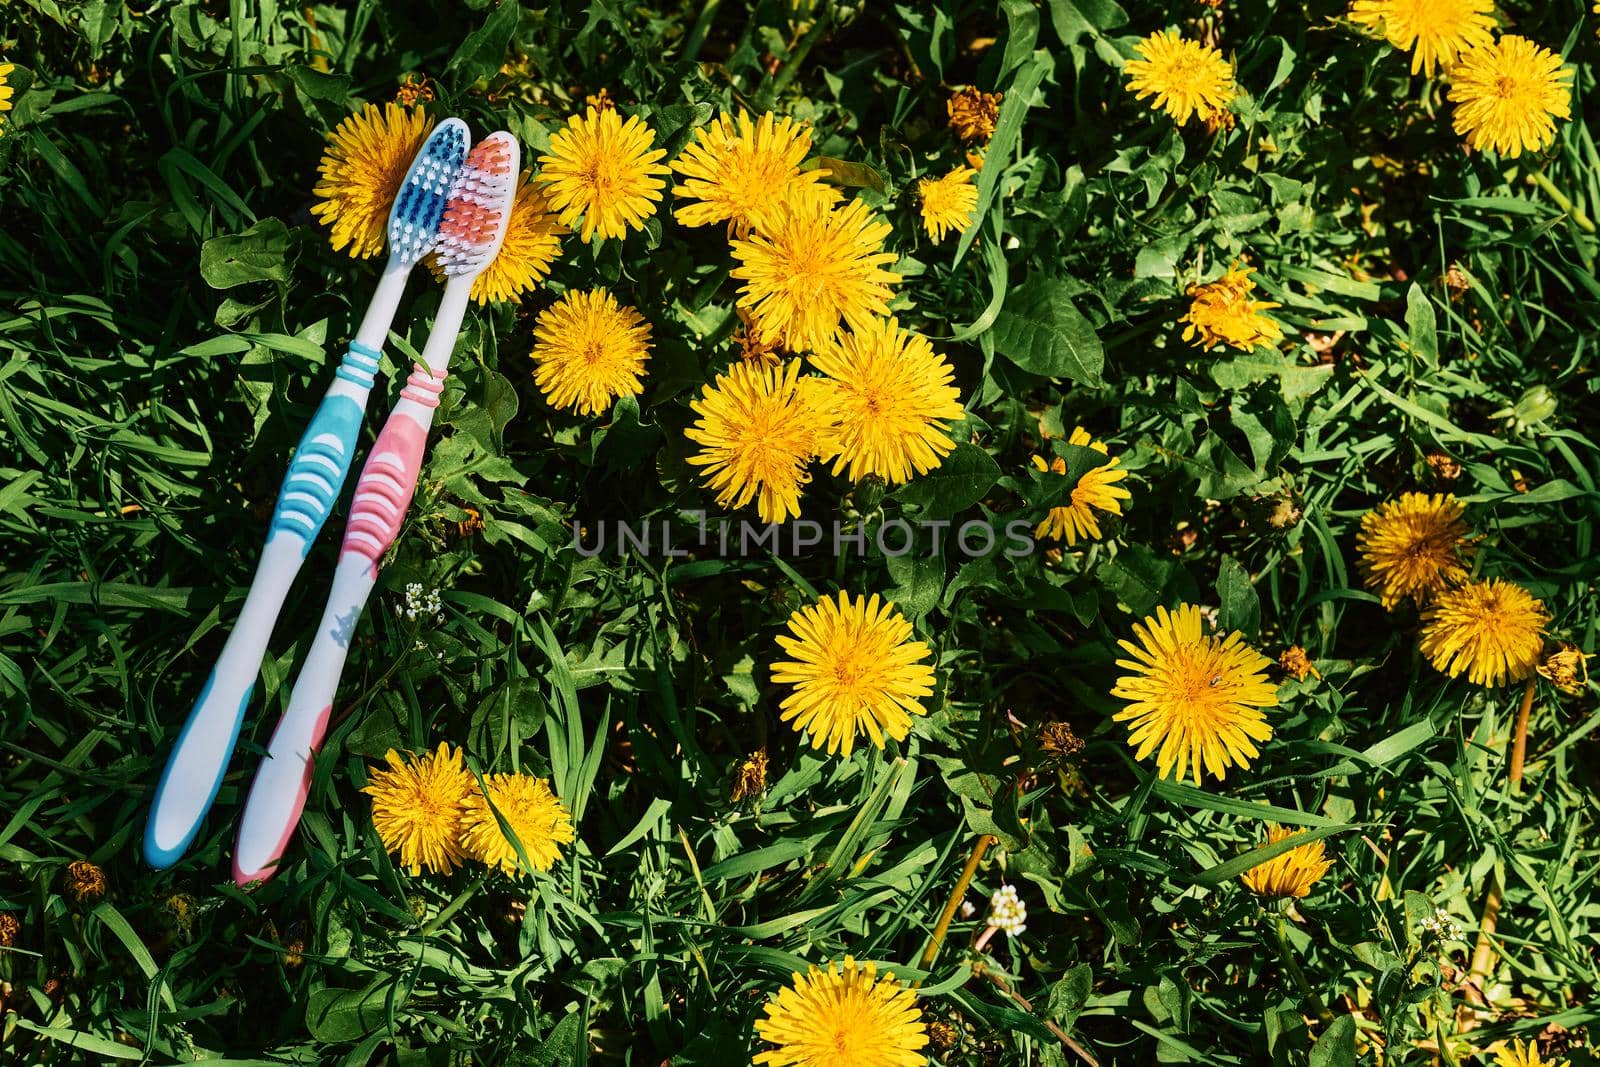 a small brush with a long handle, used for cleaning the teeth. Two toothbrushes on a green and yellow dandelion carpet.